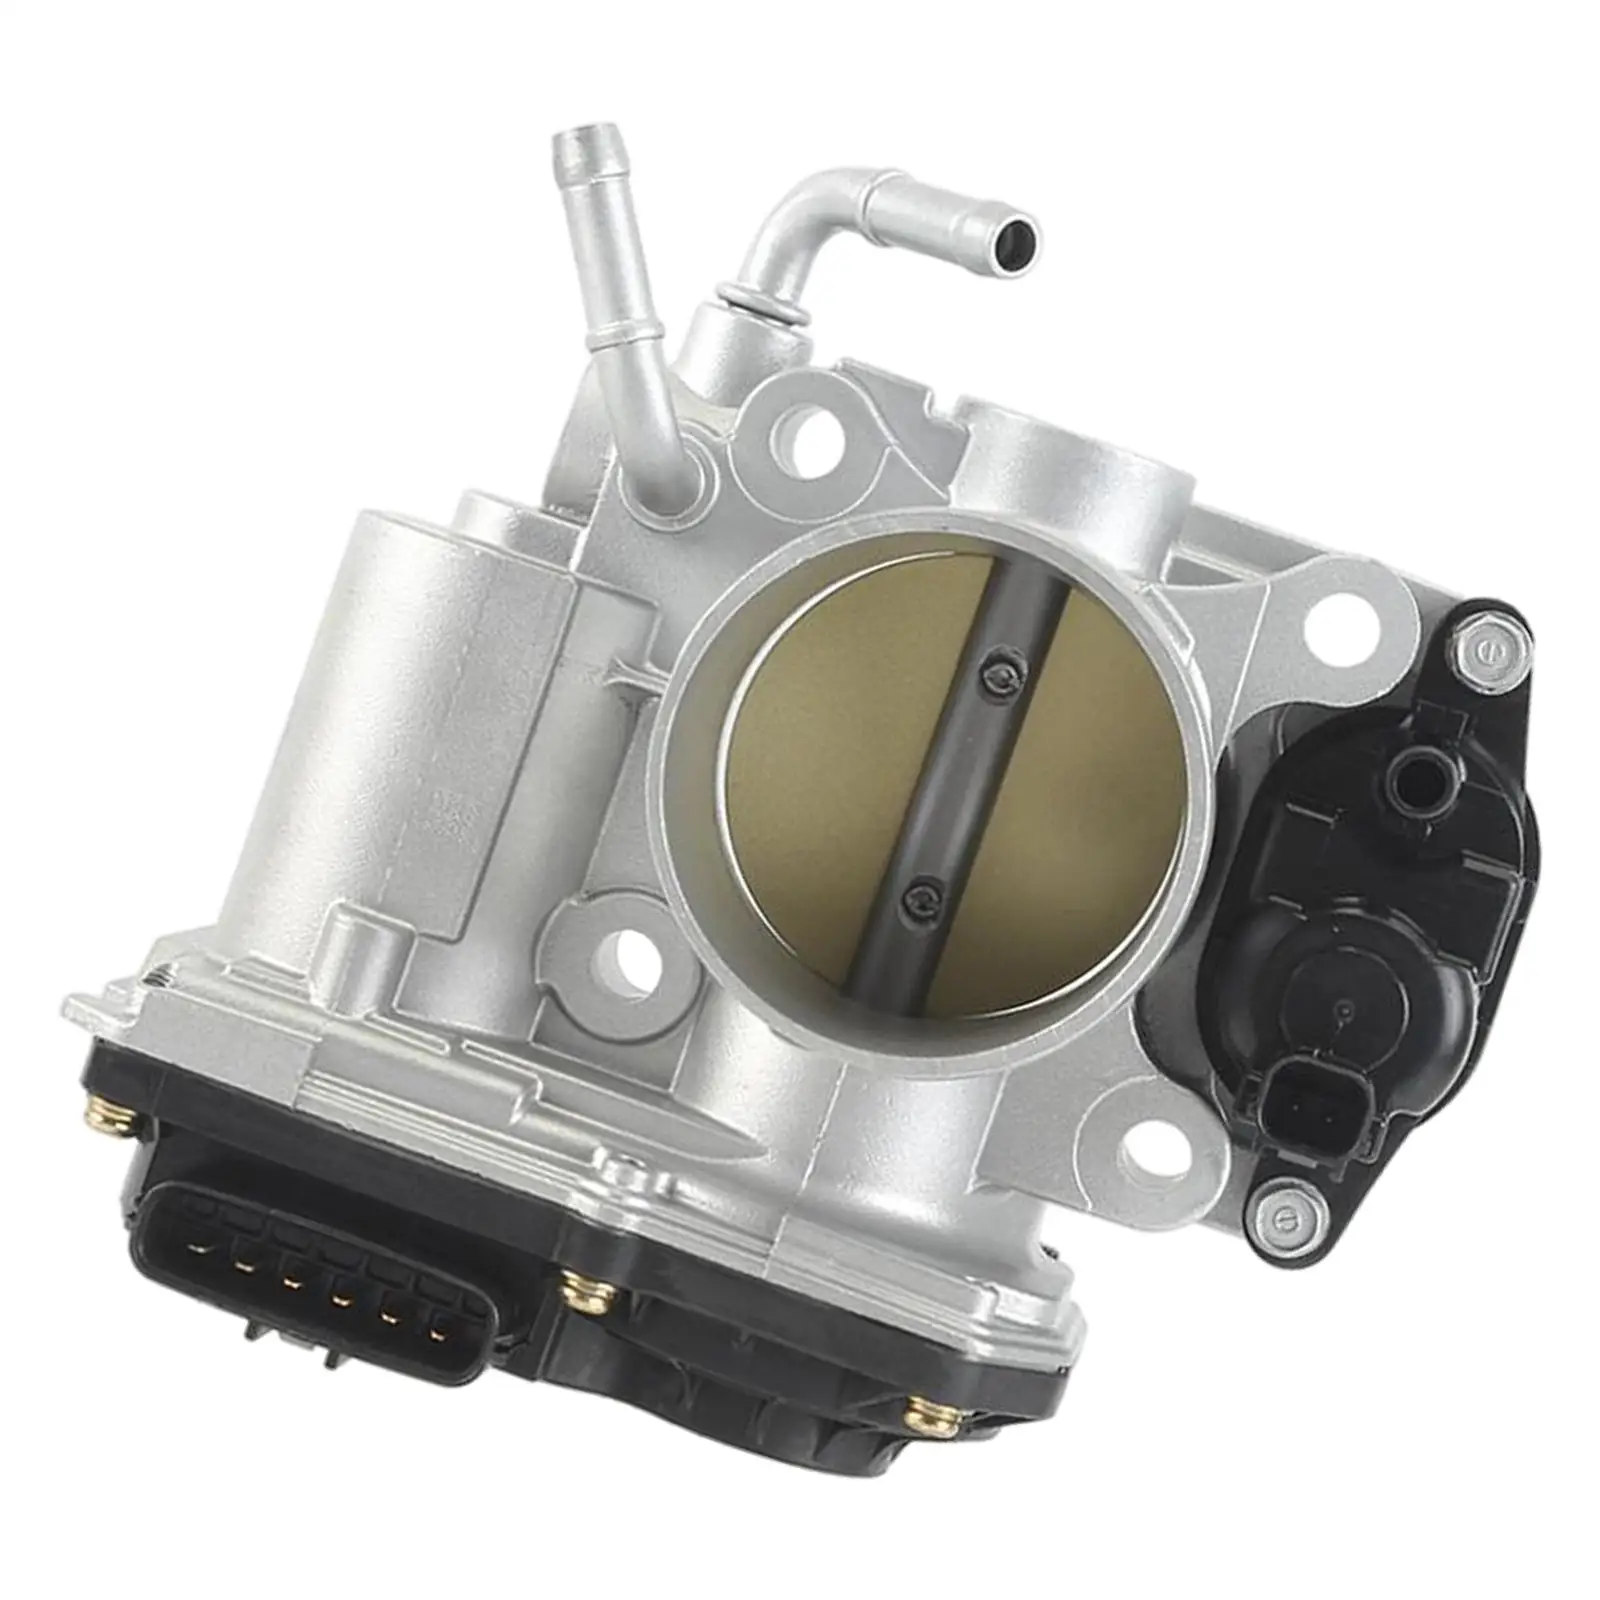 Throttle Body Replacement Parts 16400-Rnb-A01 Engine Accessories Fuel Injection Fit for Honda Civic 1.8L 2006-2011 R18 EX Lxs